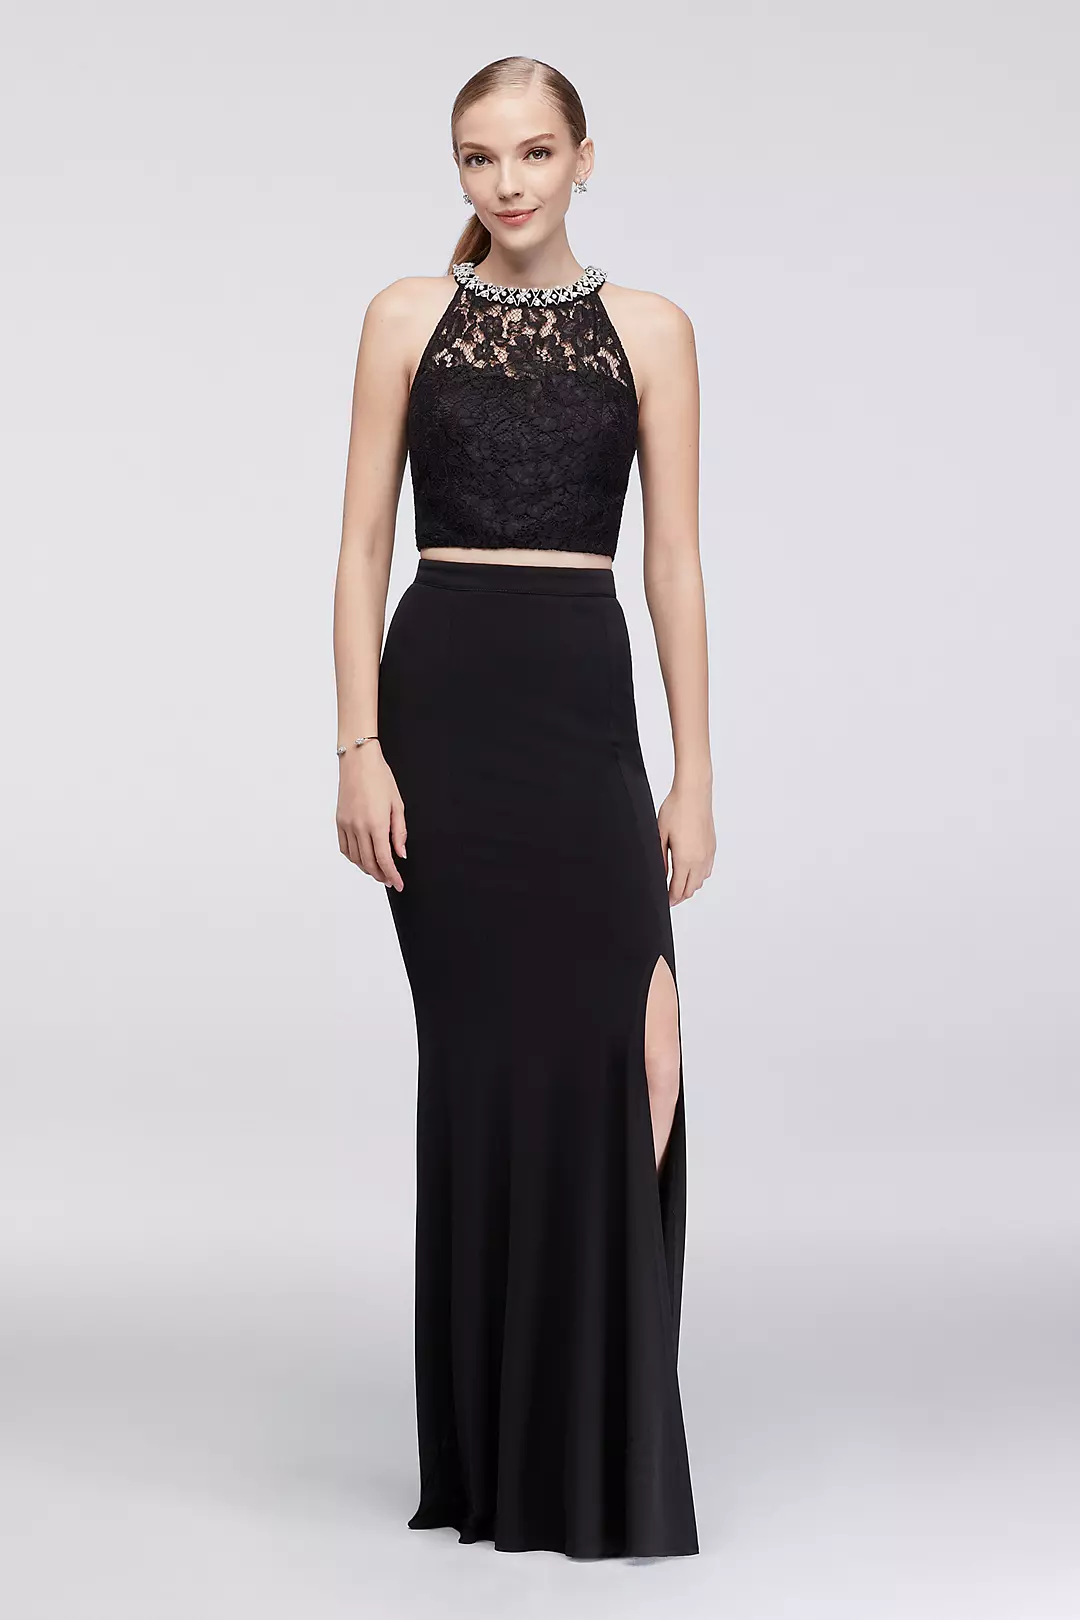 Two-Piece Lace Dress with Crystal Neckline Image